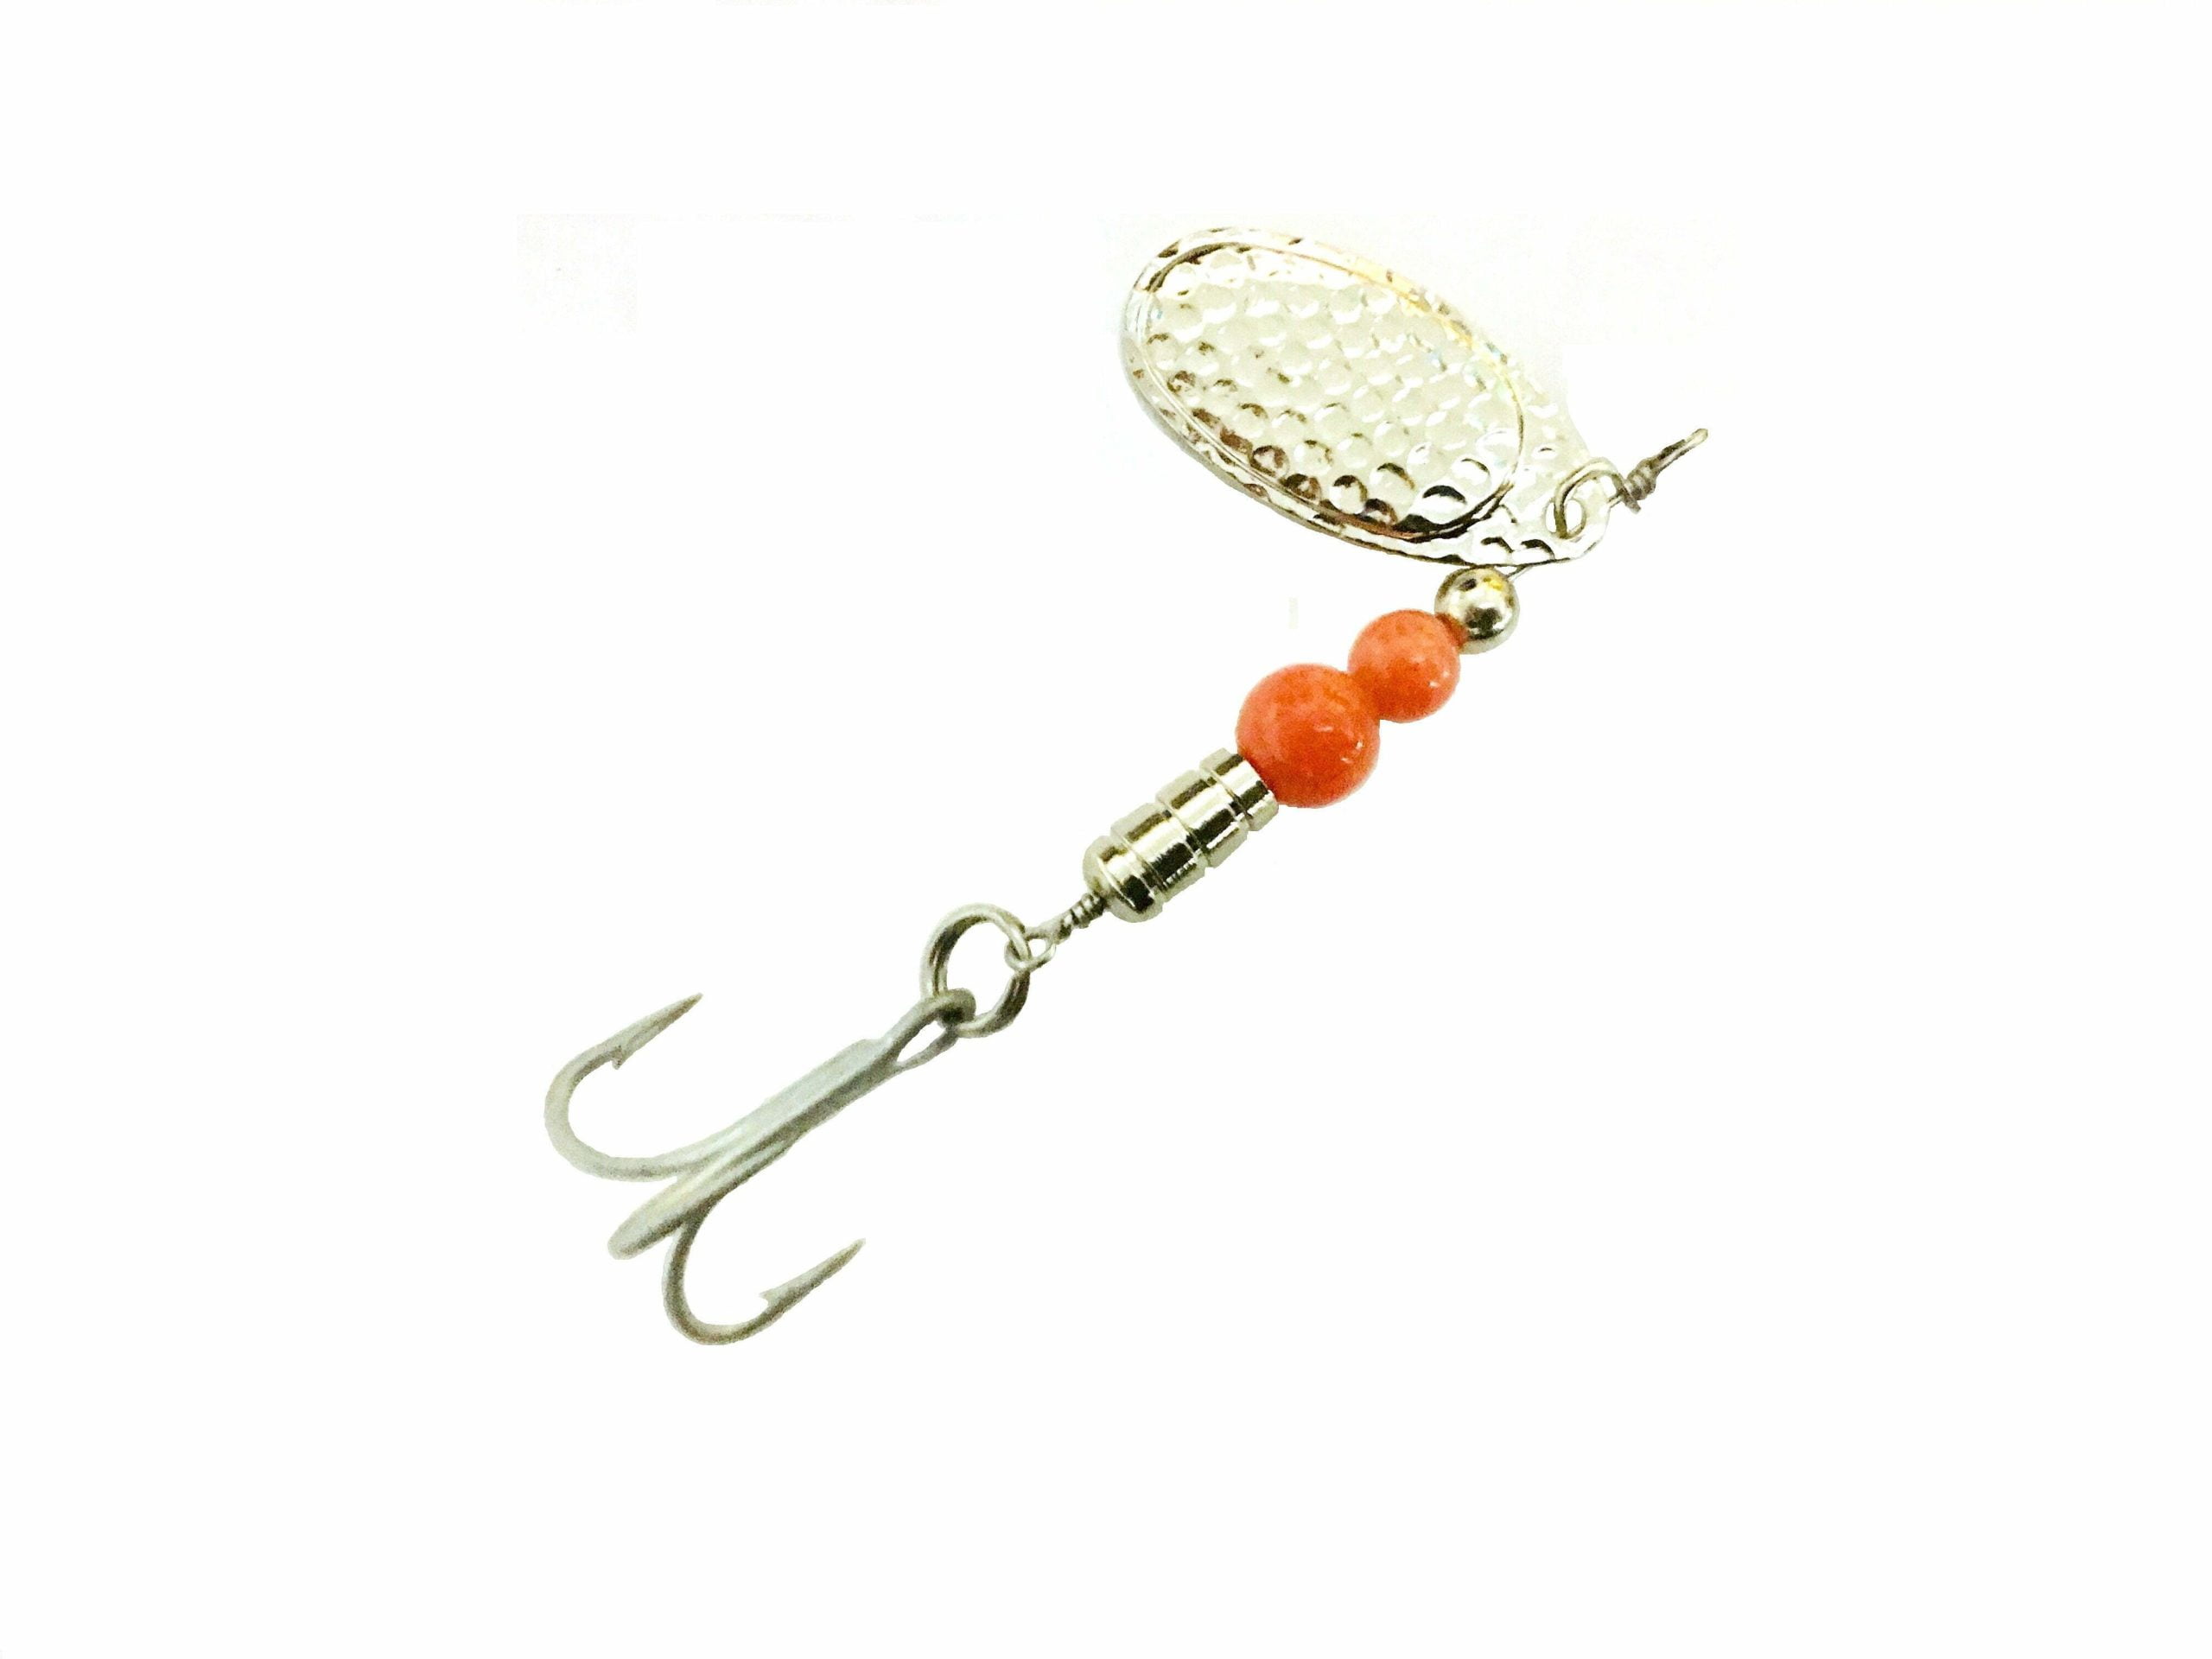 https://stonecoldbeads.com/wp-content/uploads/2018/11/SCB-4-Salmon-Berry-Casting-Spinner-with-Treble-Hook-scaled.jpeg